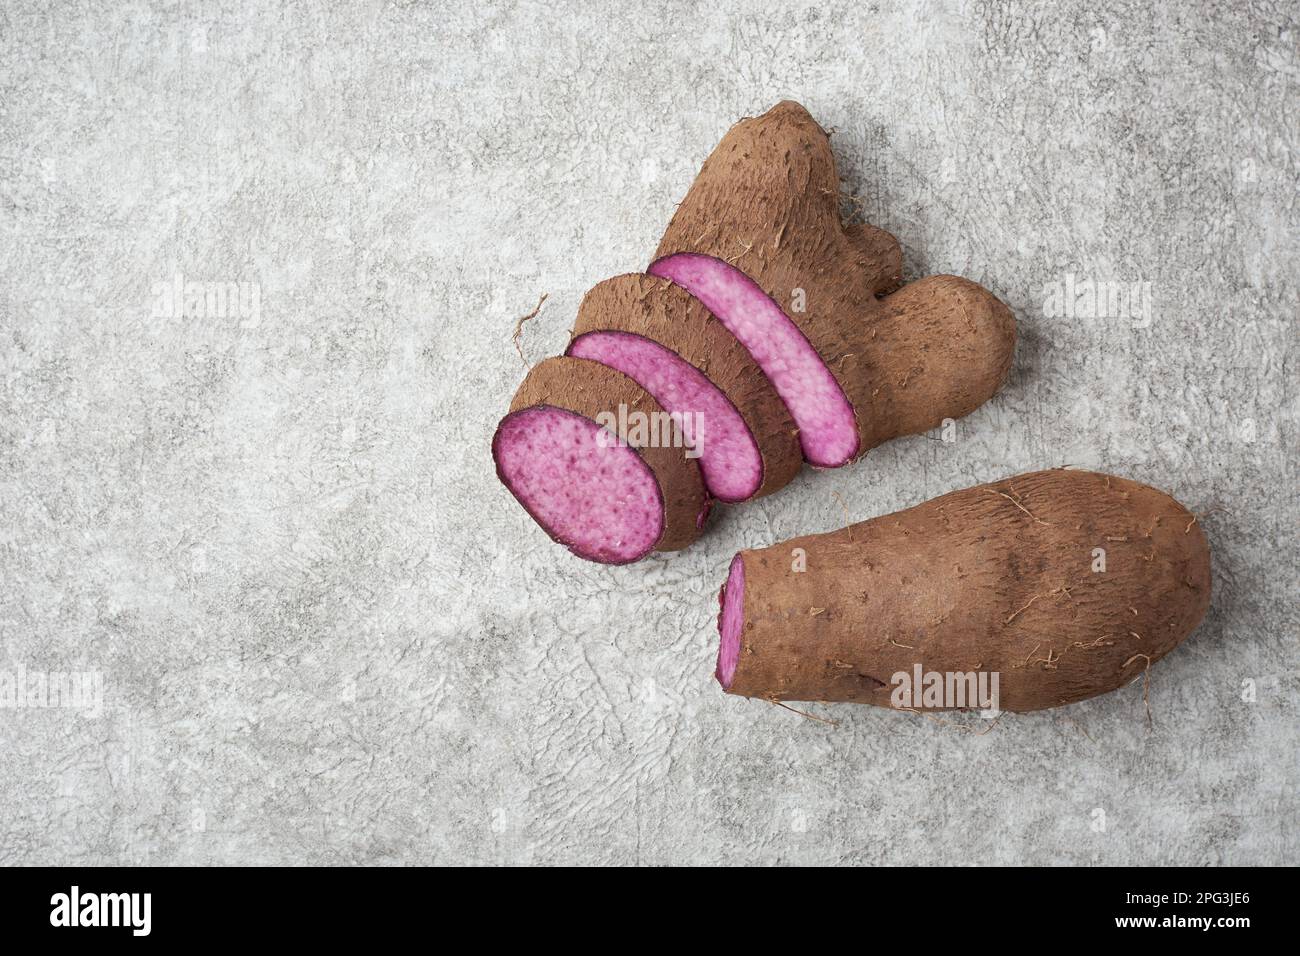 sliced purple yam on a white textured surface, dioscorea alata, aka ube, violet yam, water or greater yam, purple-fleshed tubers used in cuisine Stock Photo